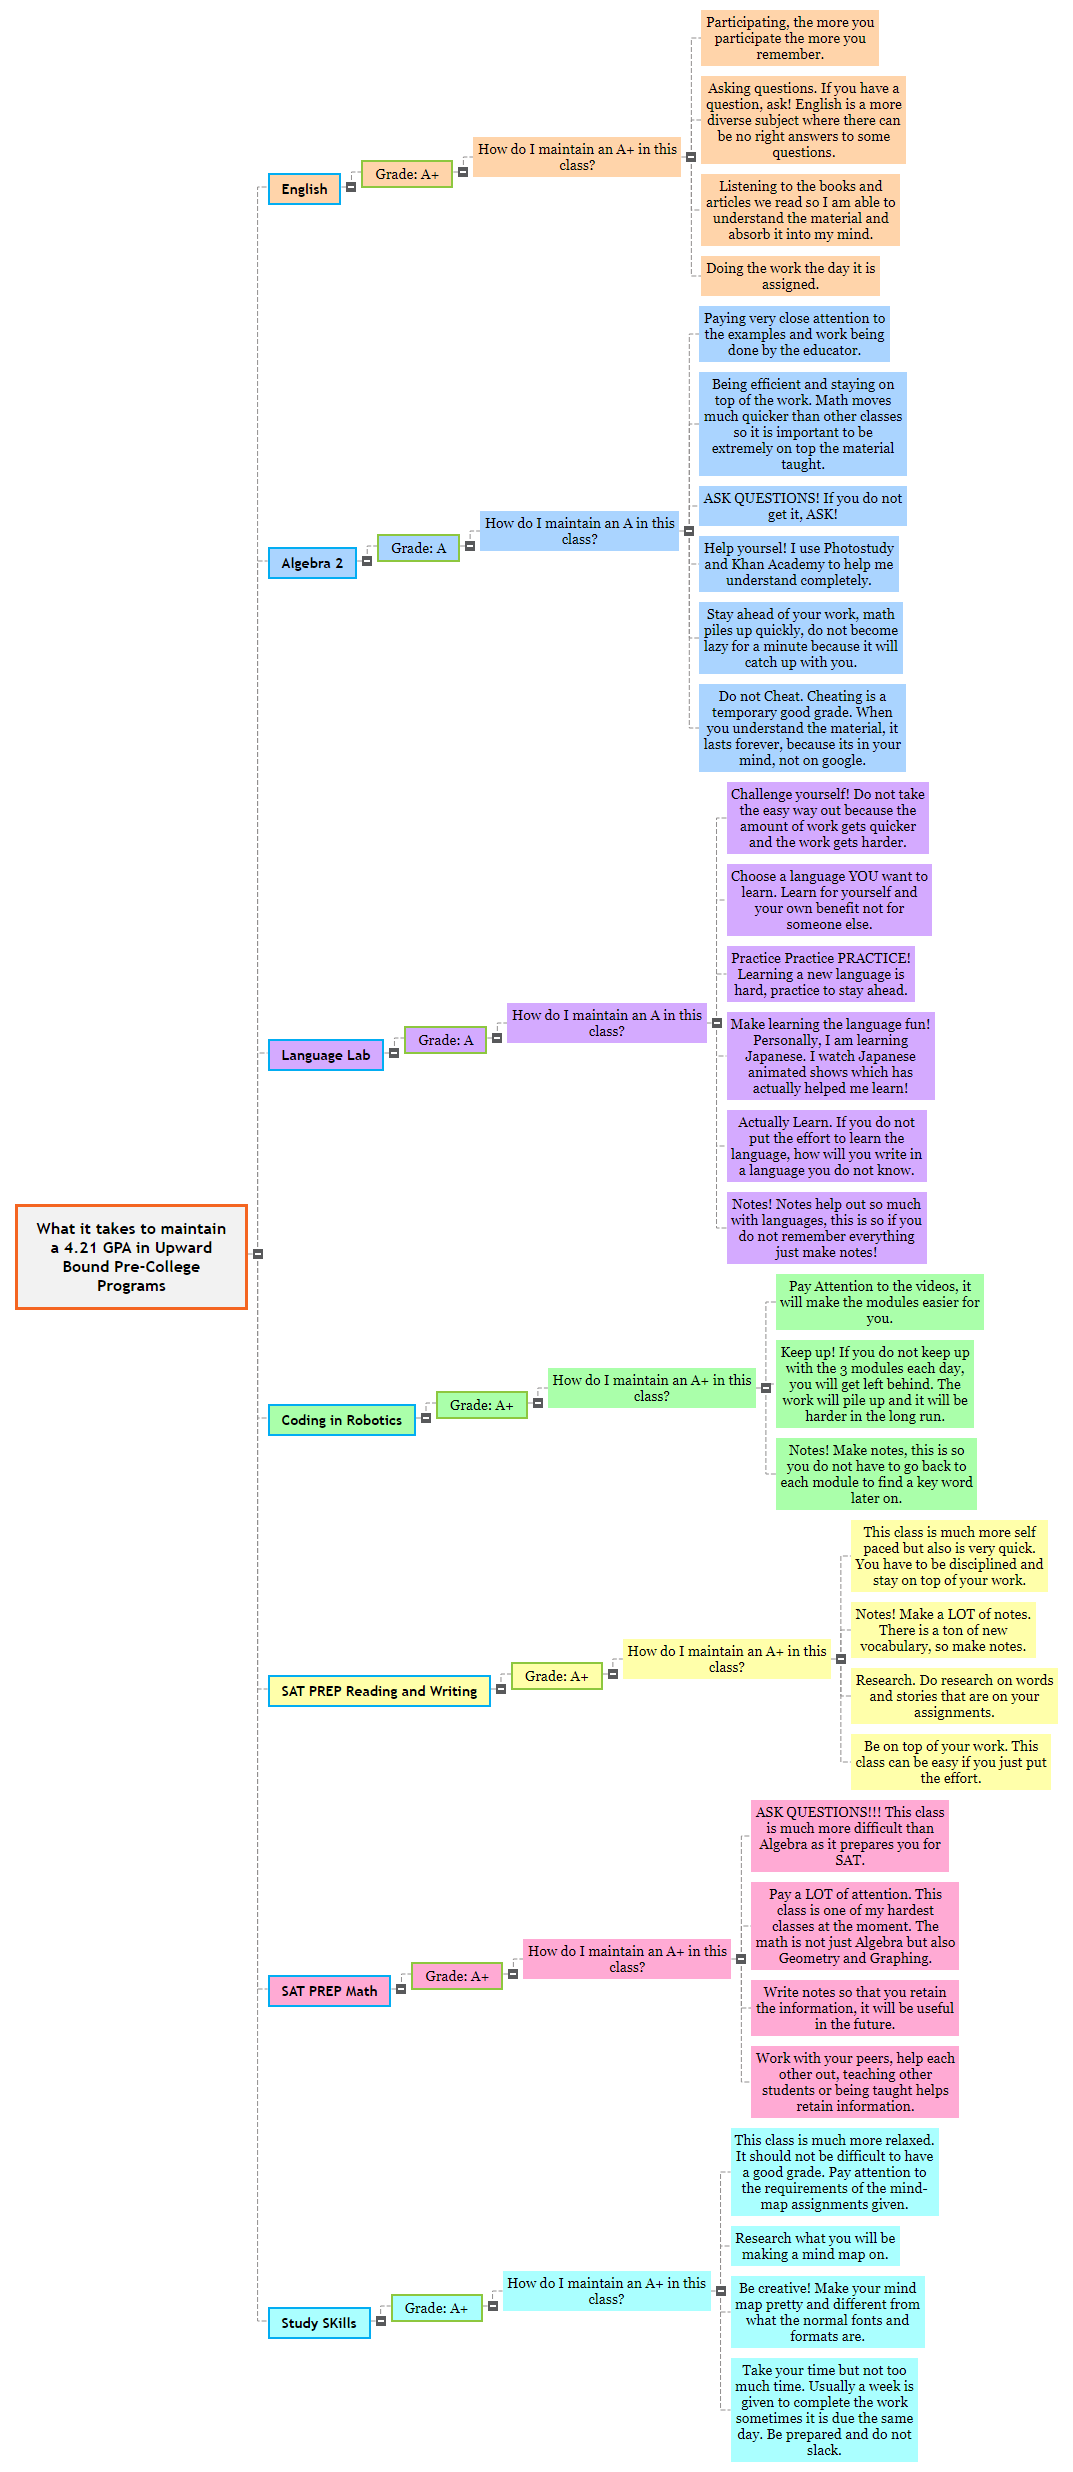 What it takes to maintain a 4.21 GPA in Upward Bound Pre-College Programs Mind Map